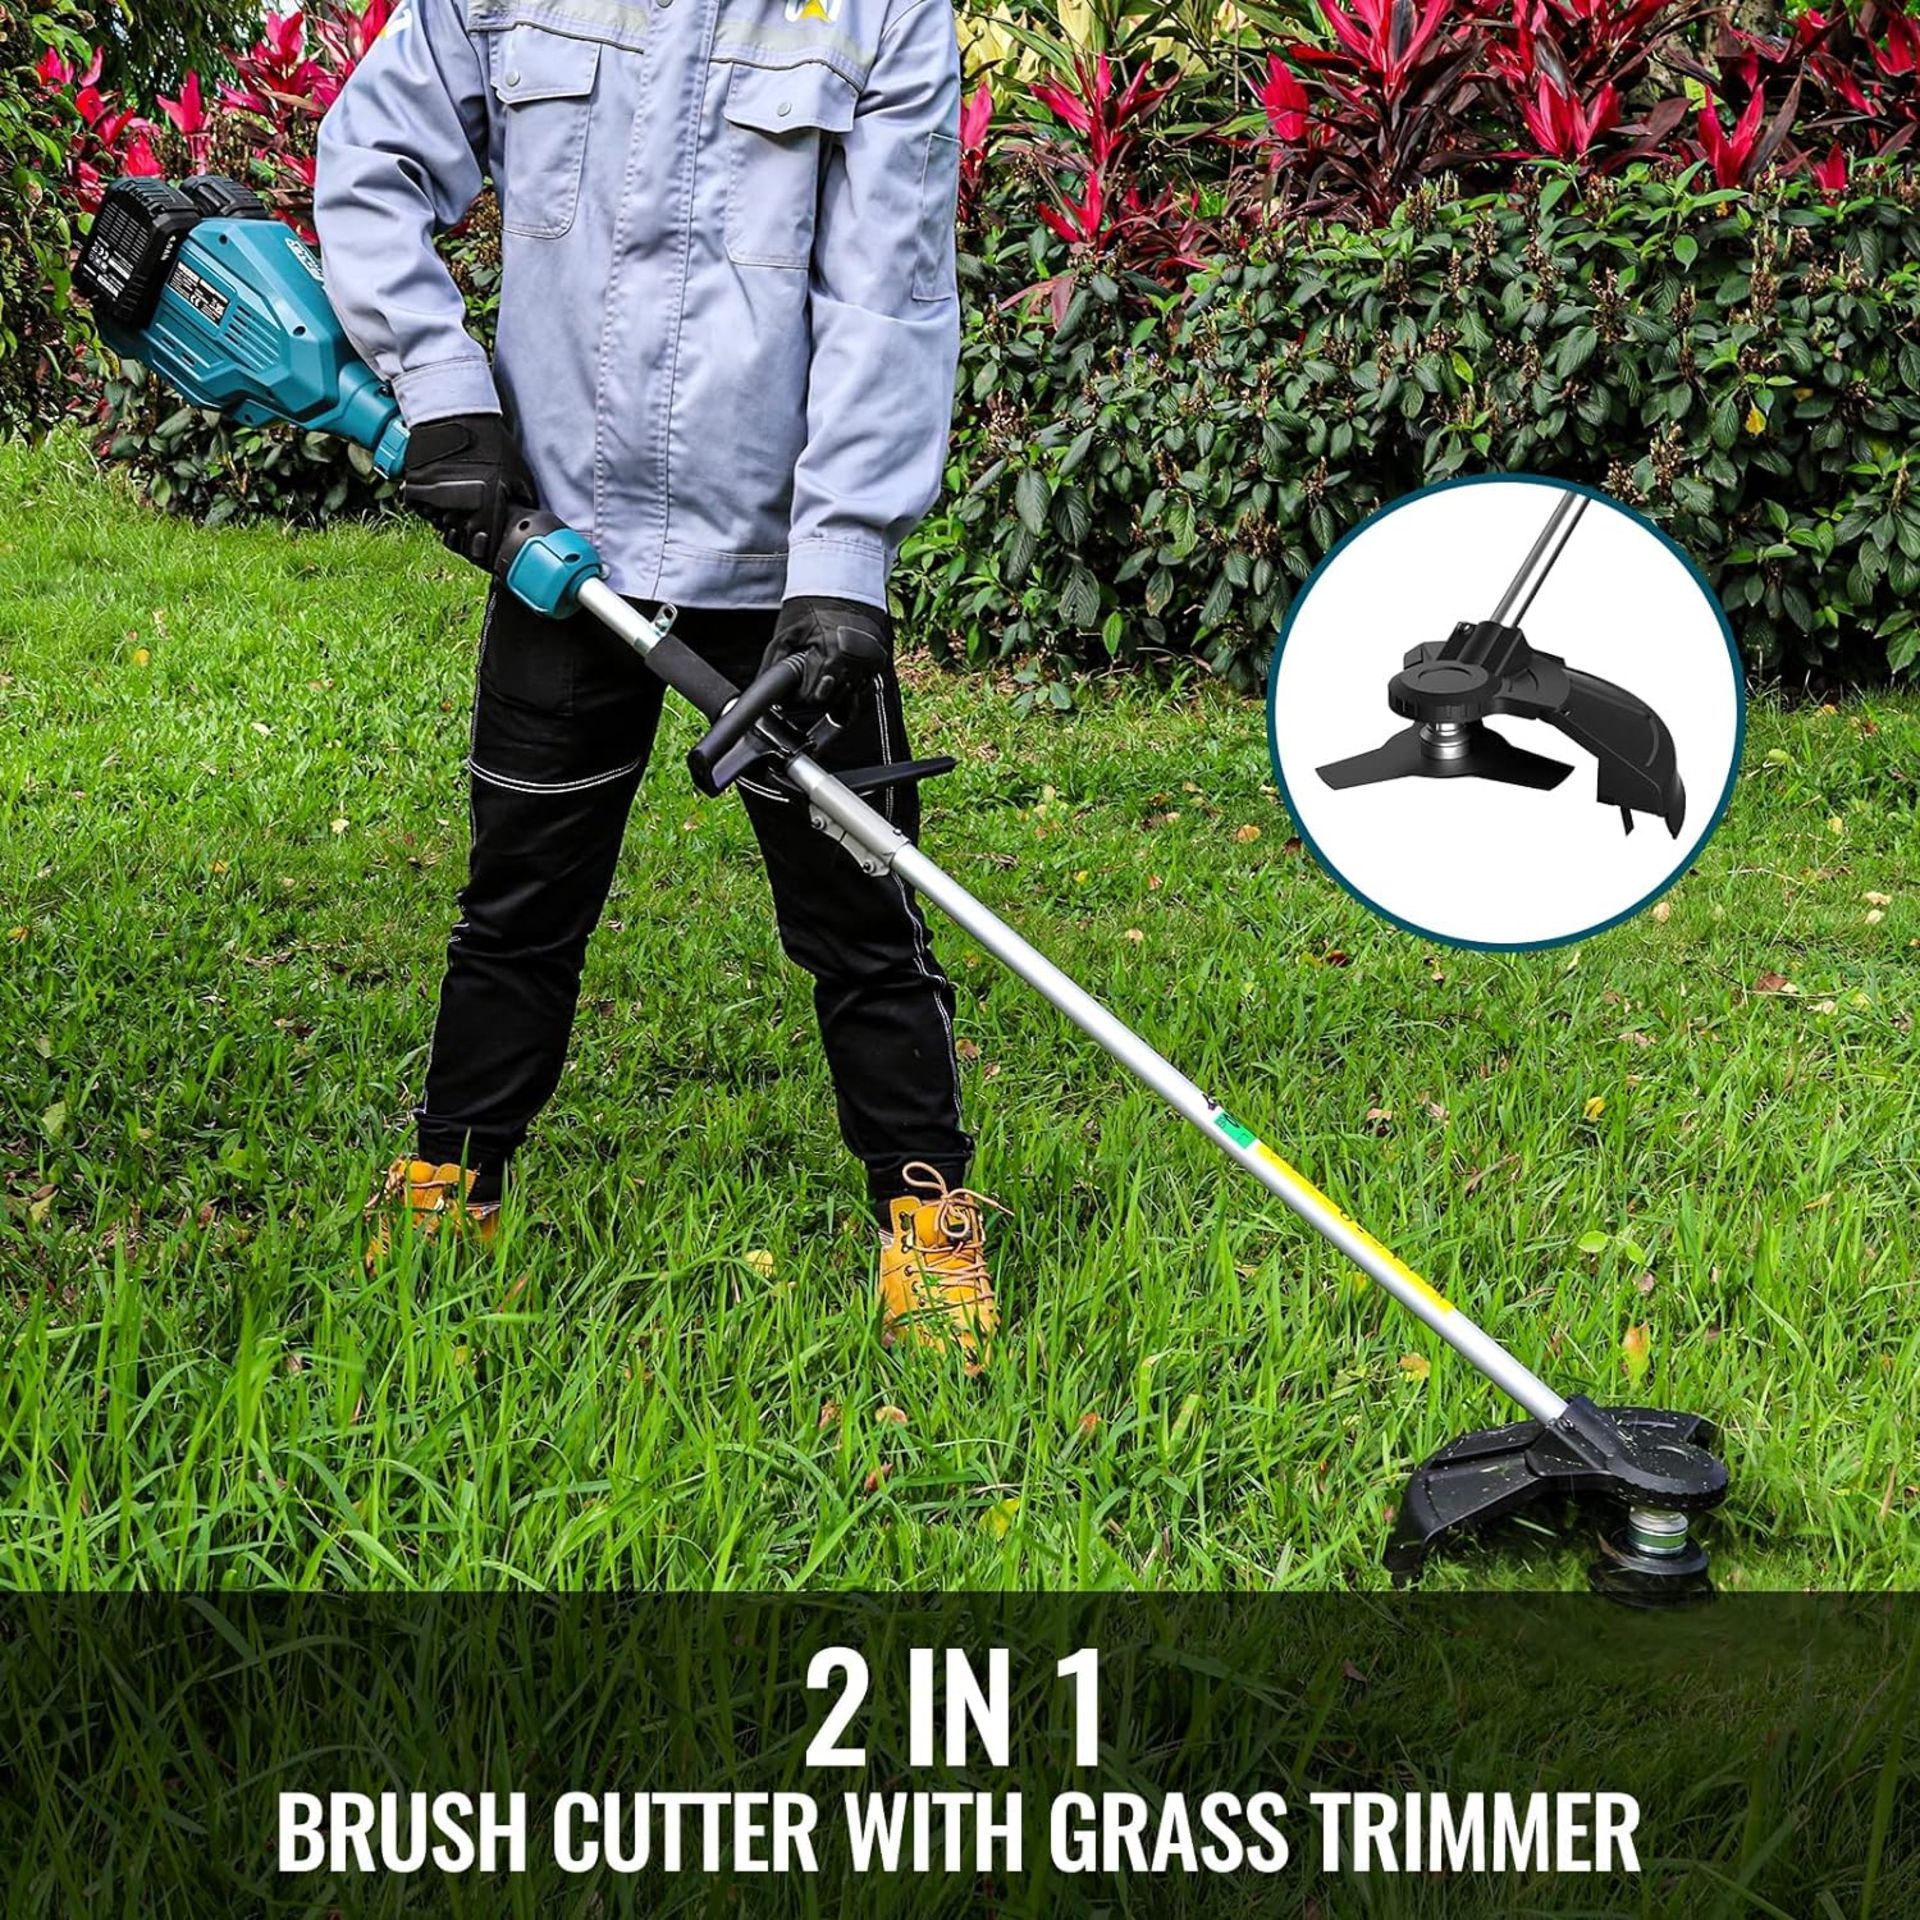 NEW & BOXED WESCO 36V Cordless 2-in-1 Brush Cutter & String Trimmer. RRP £169.99 EACH. It can not - Image 5 of 6